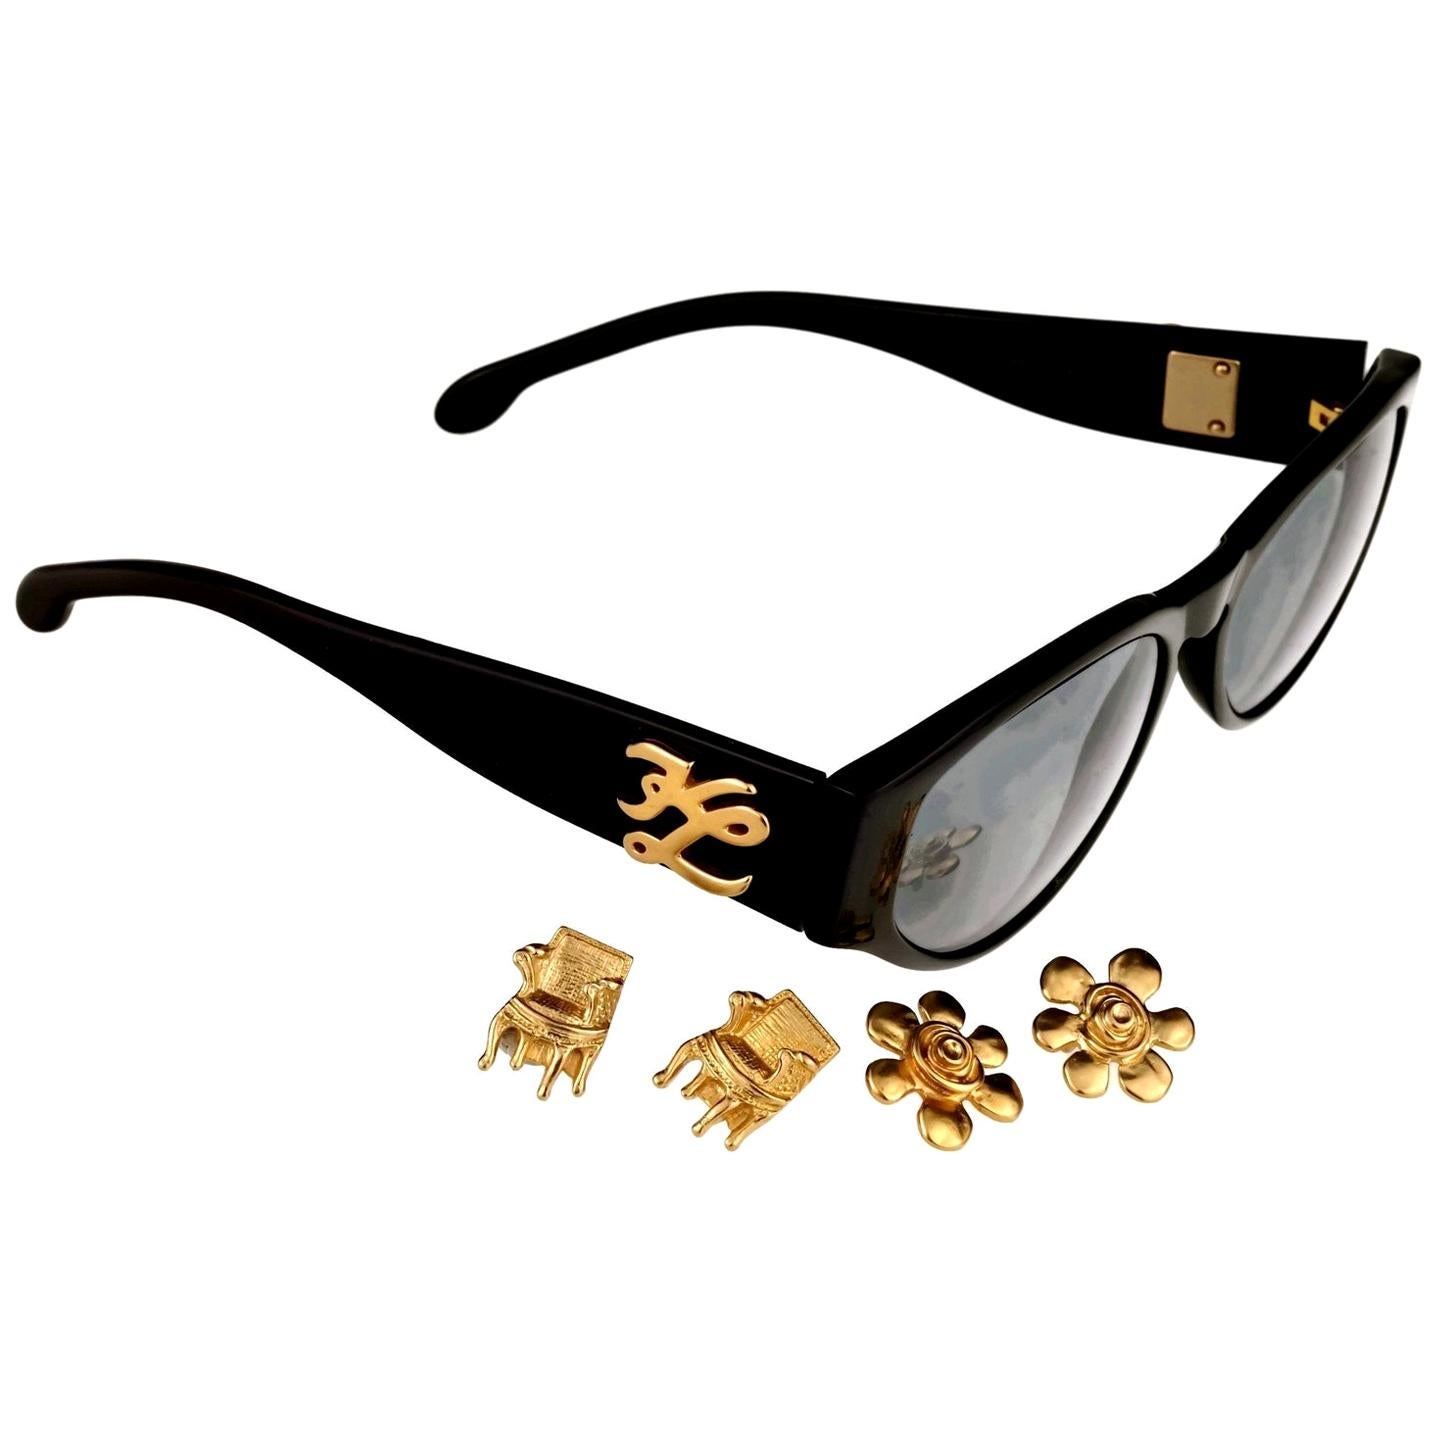 Vintage KARL LAGERFELD Interchangeable Iconic Charms Emblem Sunglasses